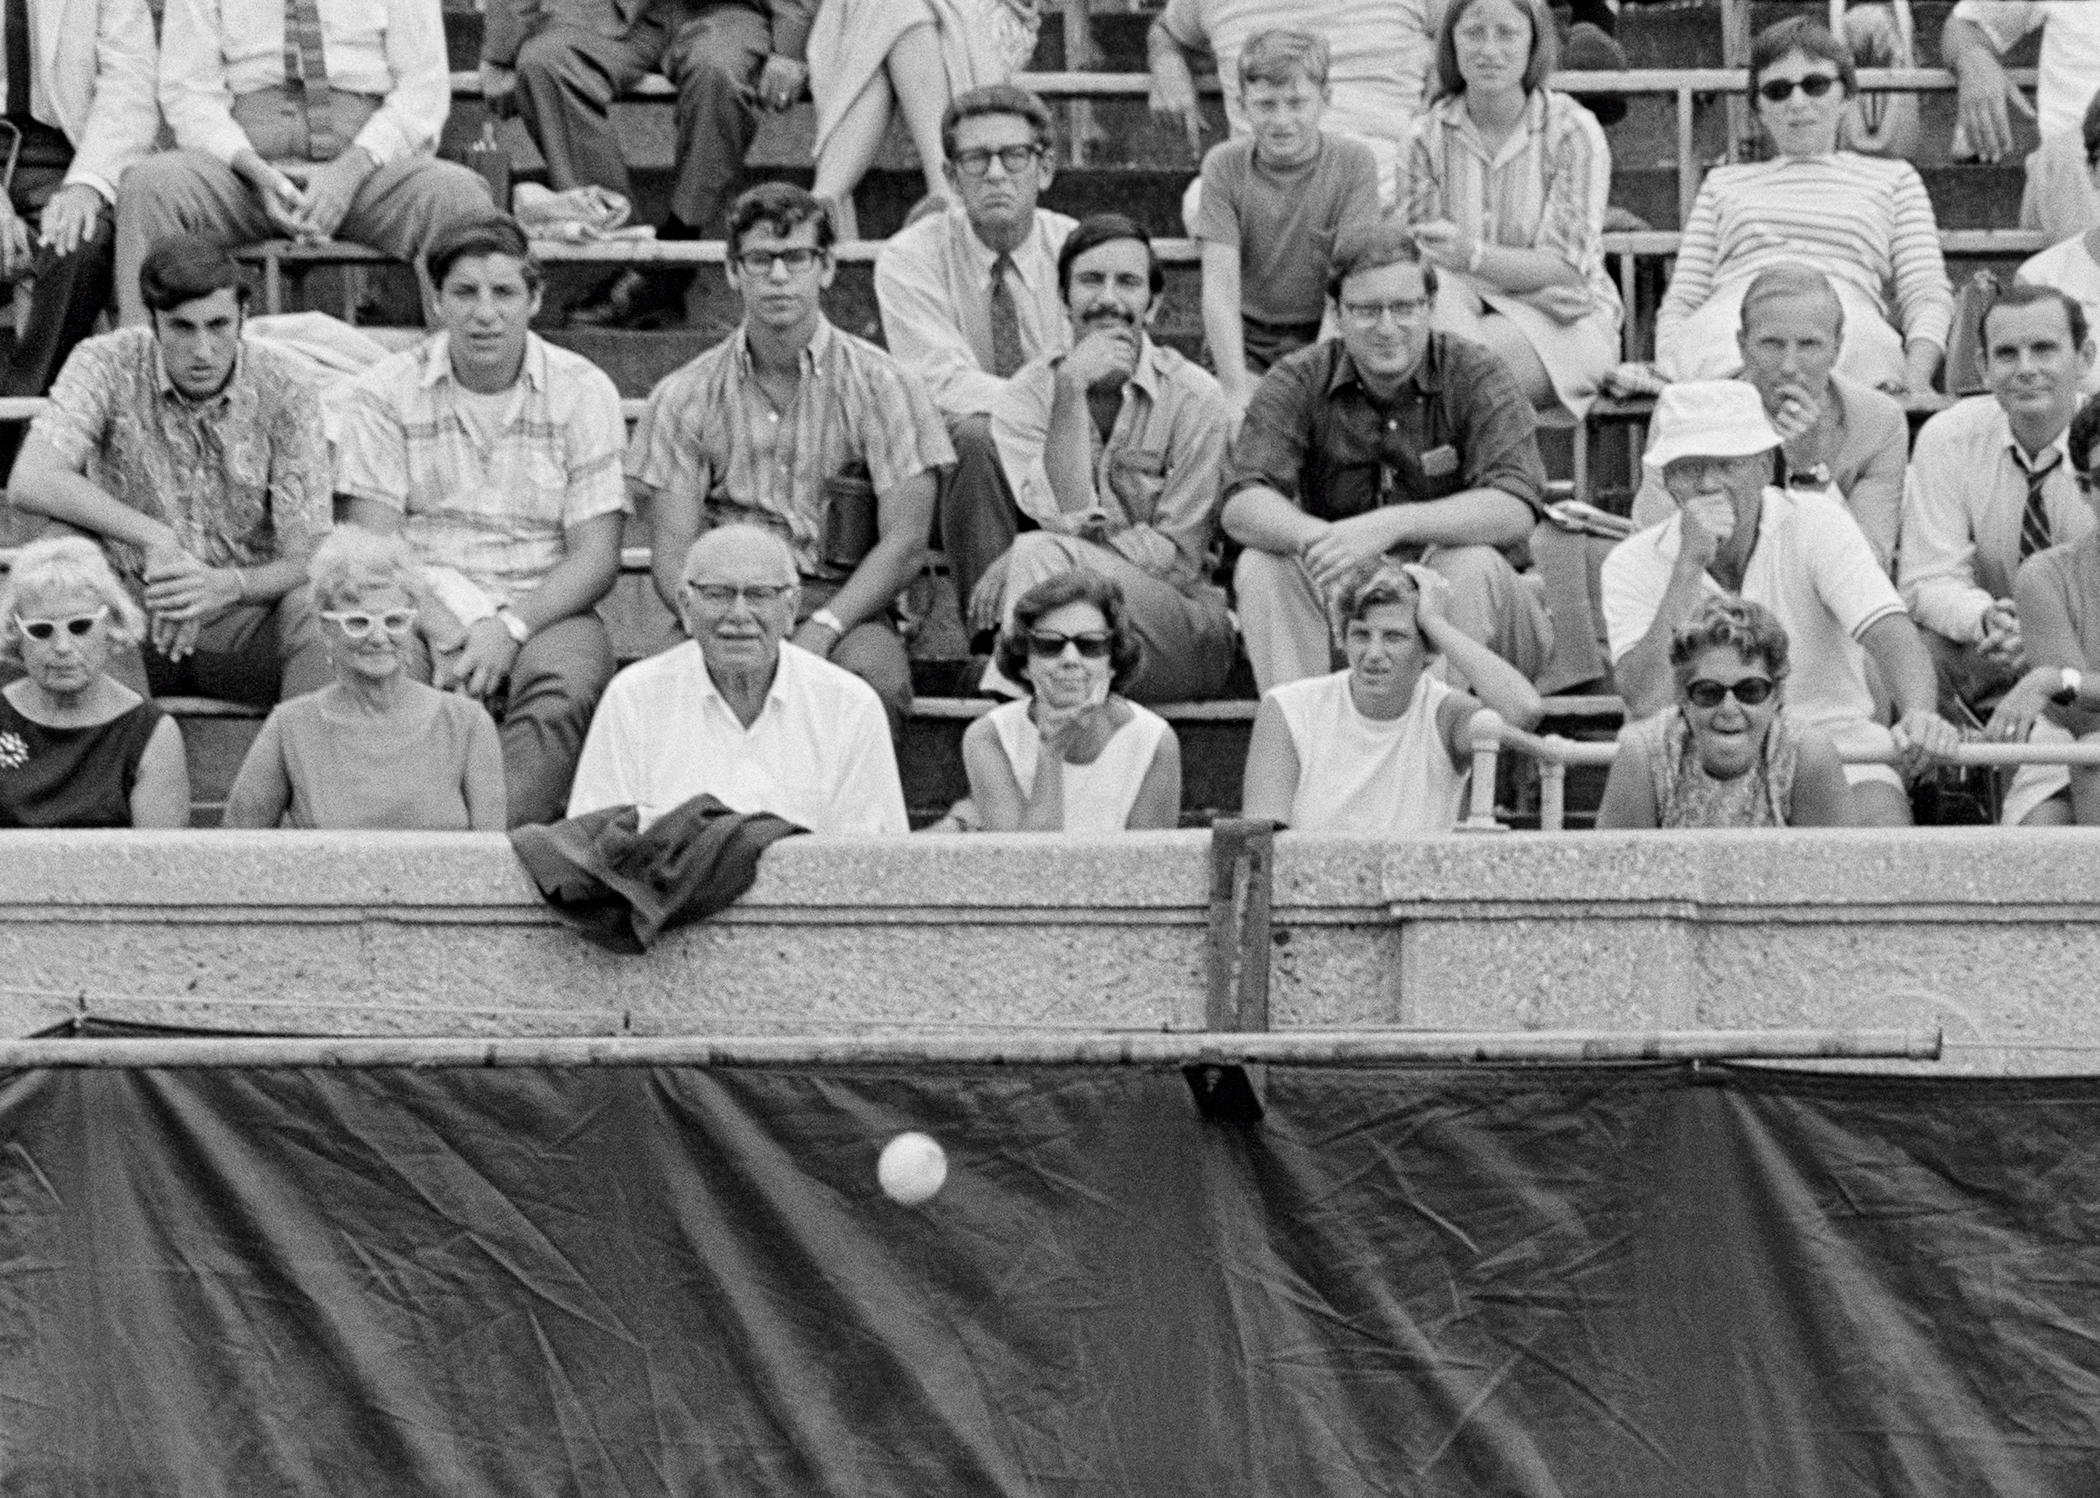 Crowd watches action during Men's Singles Final between Arthur Ashe and Tom Okker, U.S. Open, West Side Tennis Club, Forest Hills New York, September 9, 1968. Photo by John G. Zimmerman.